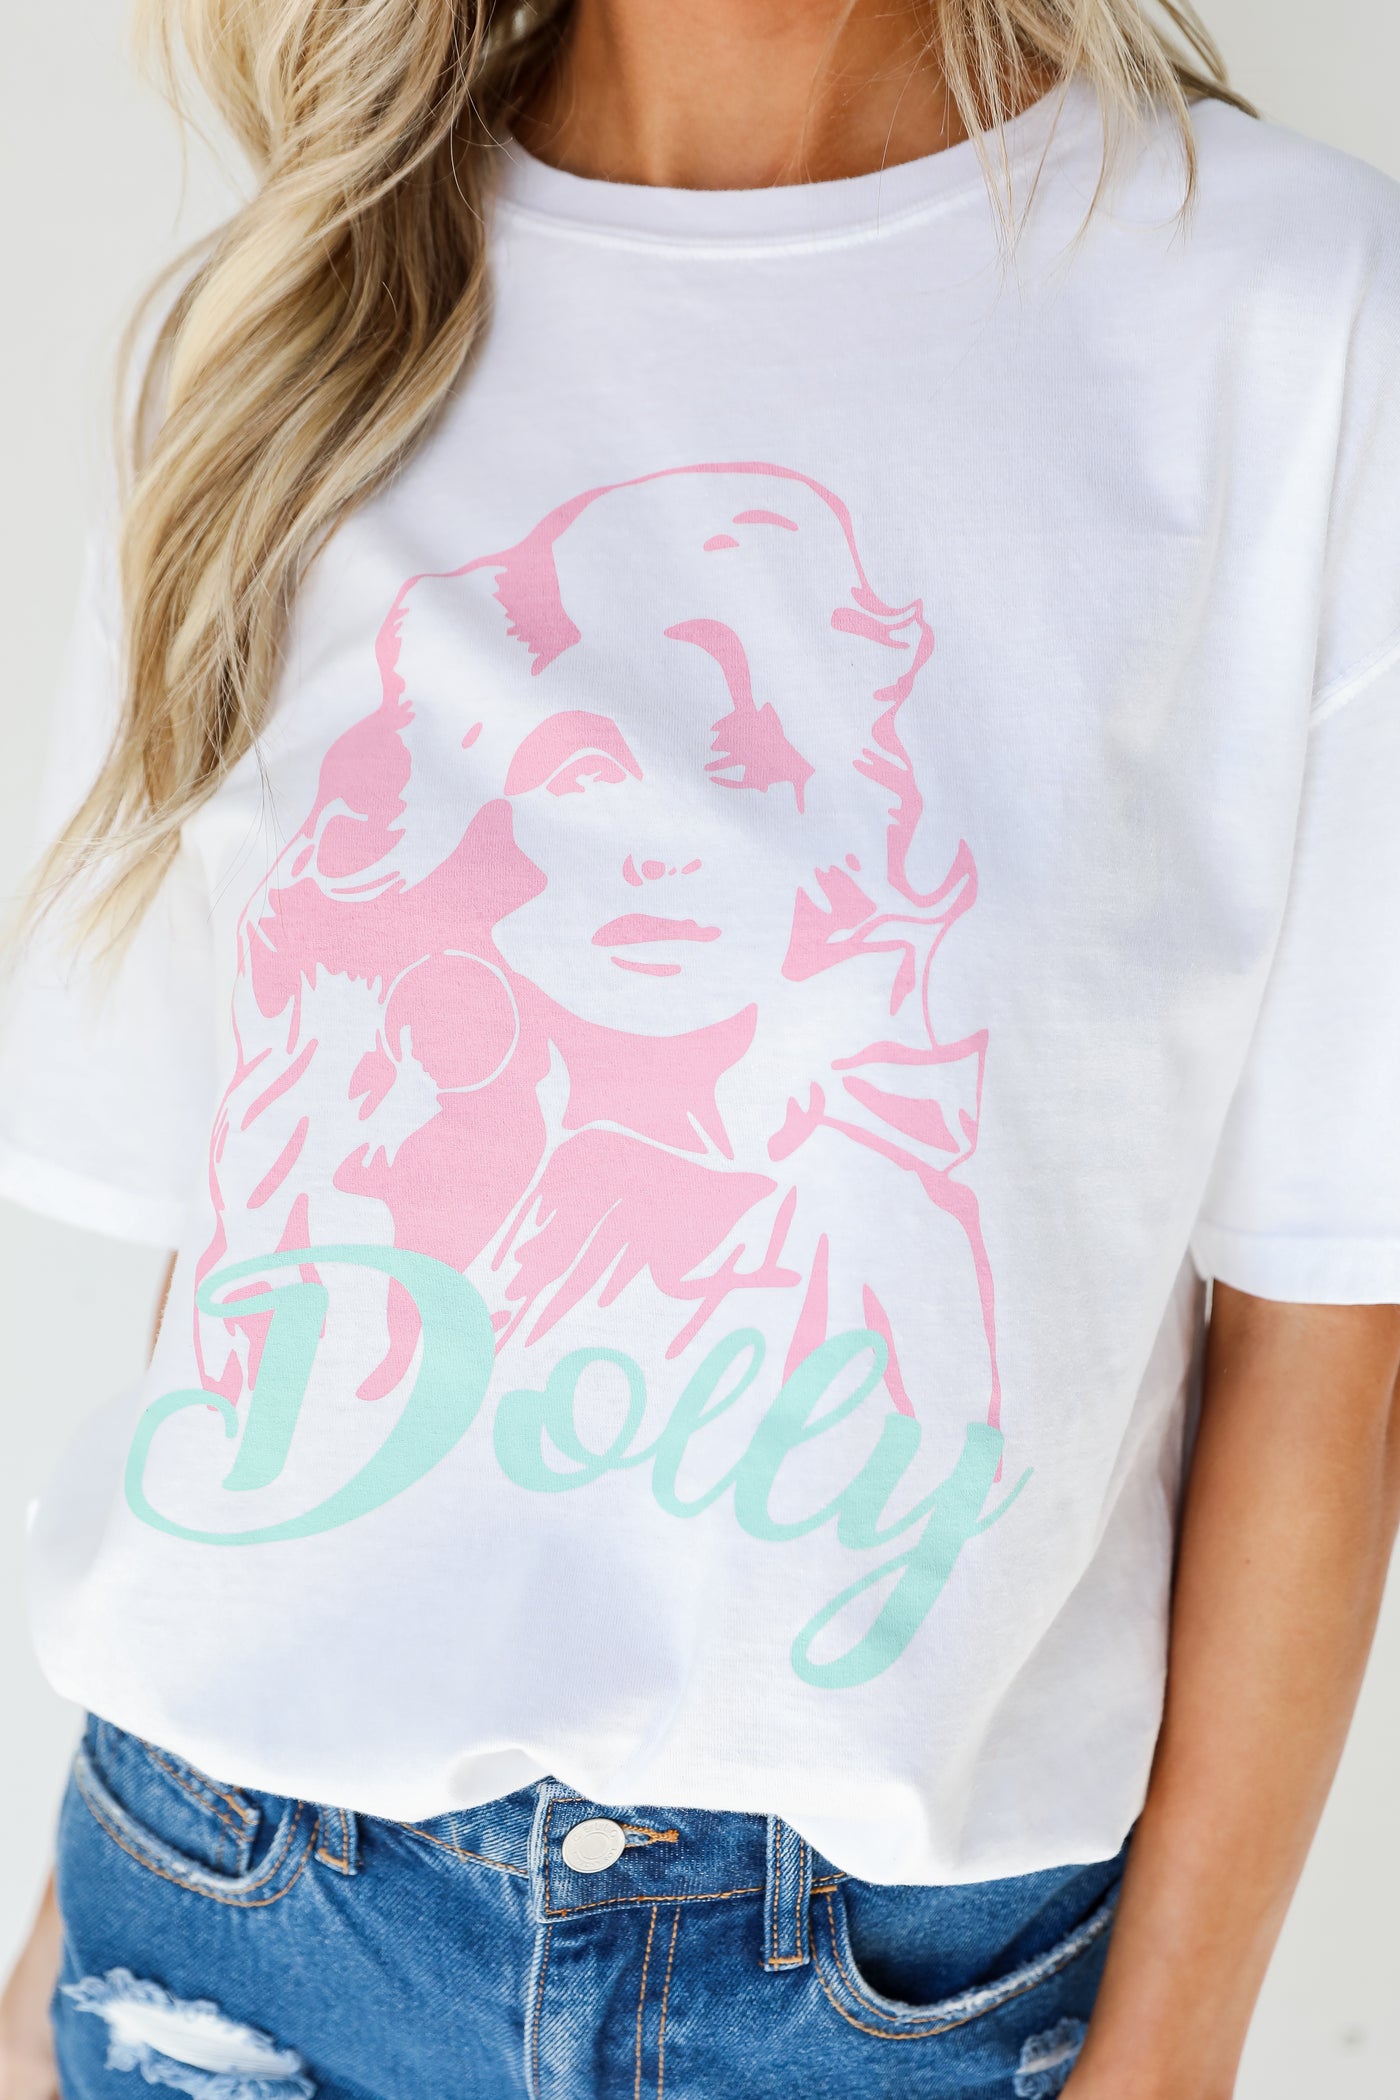 Dolly Parton Tee from dress up